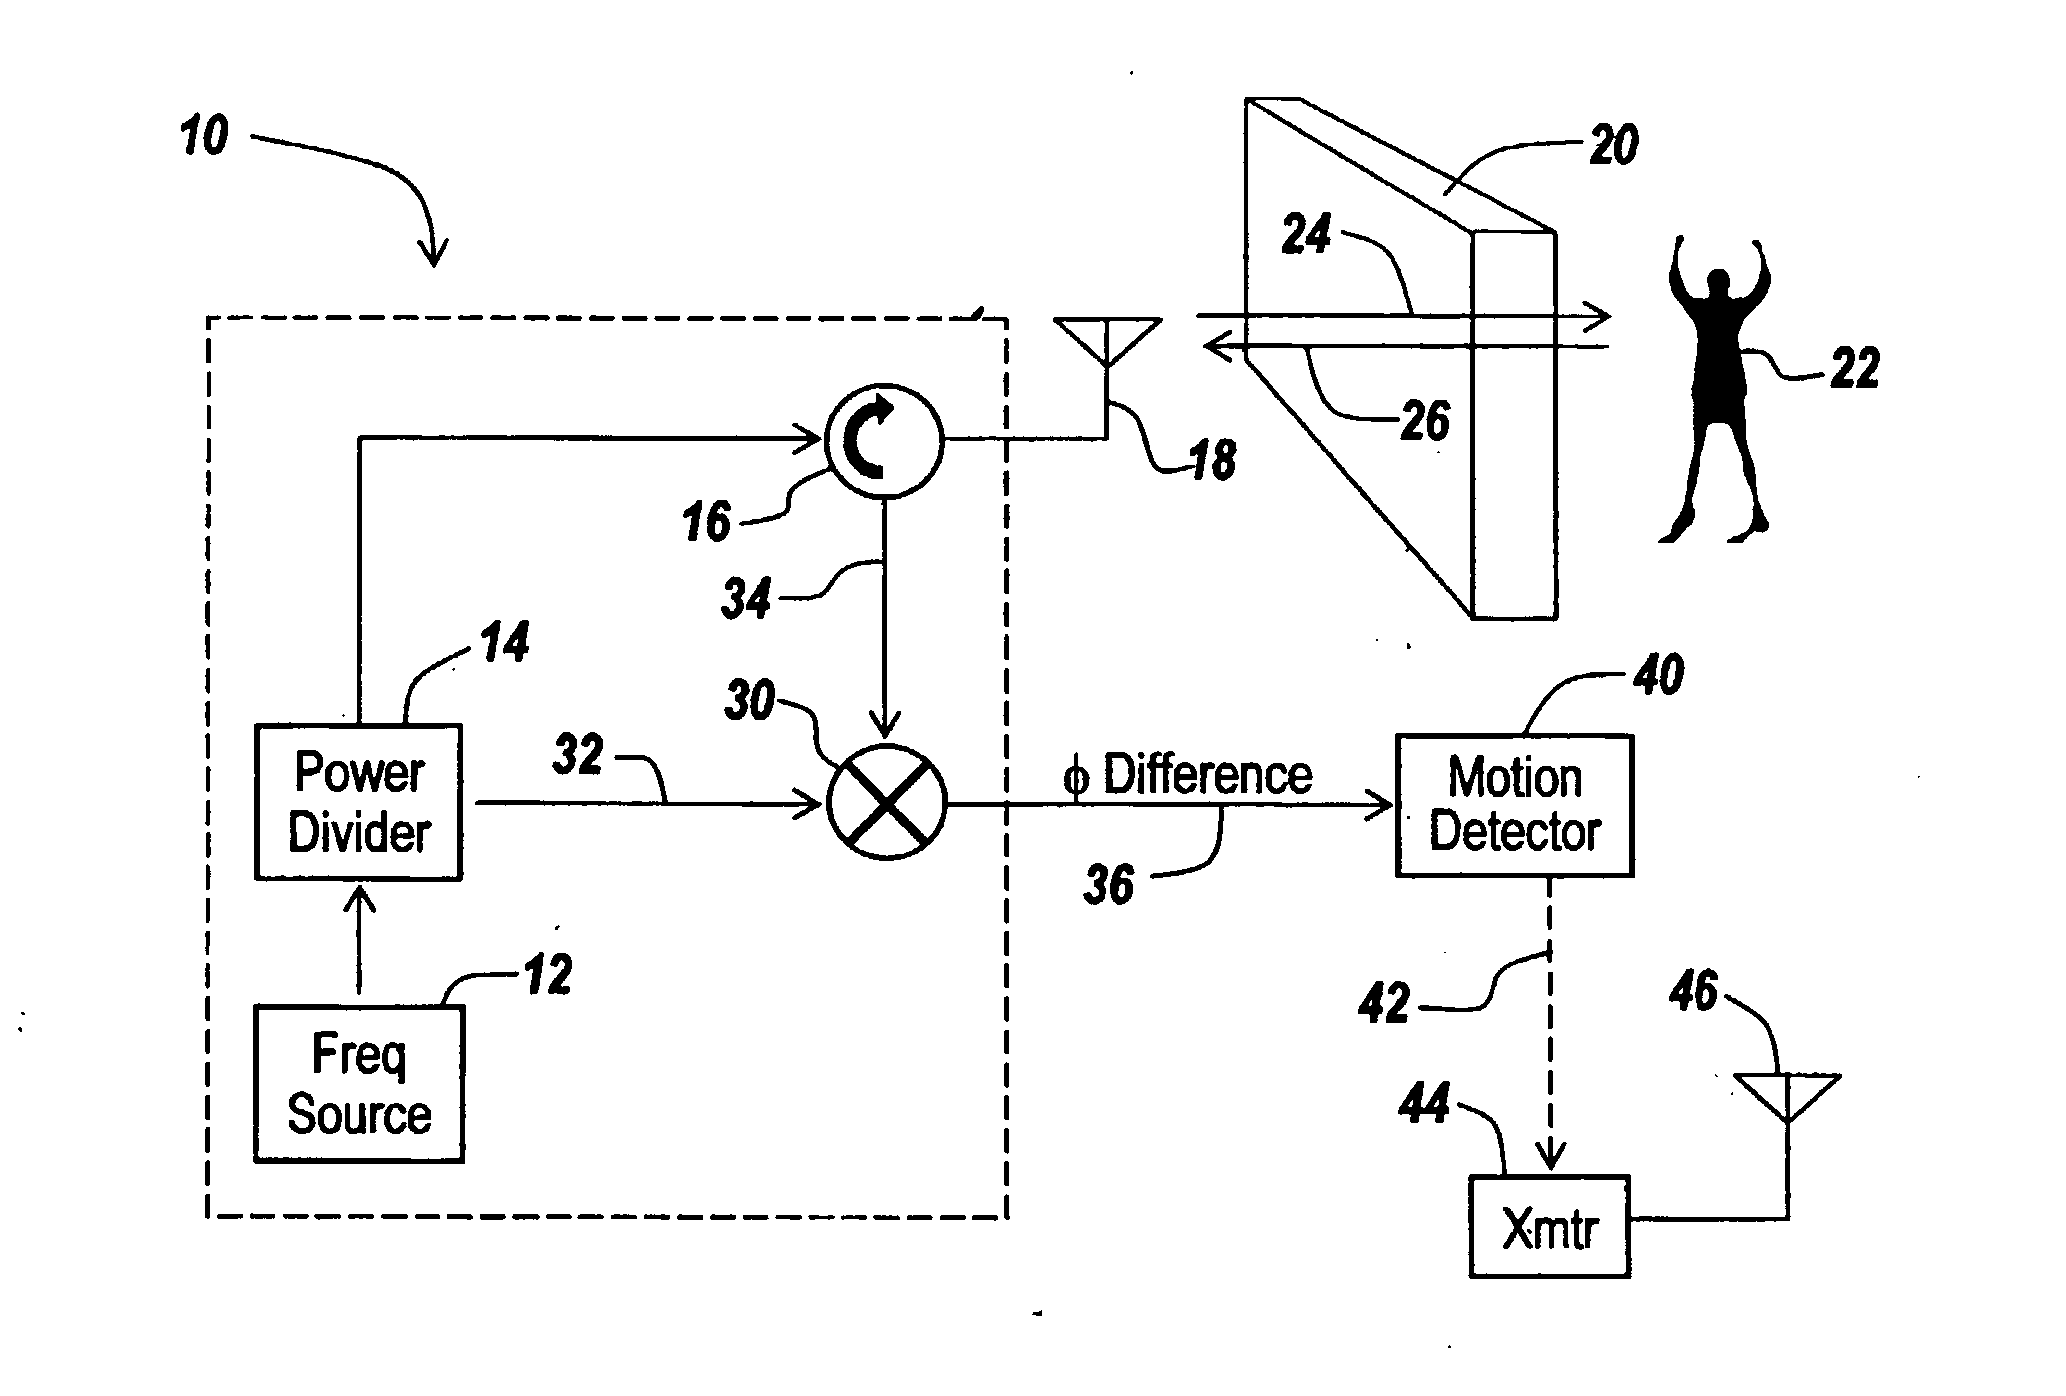 Method and apparatus for through-the-wall motion detection utilizing cw radar